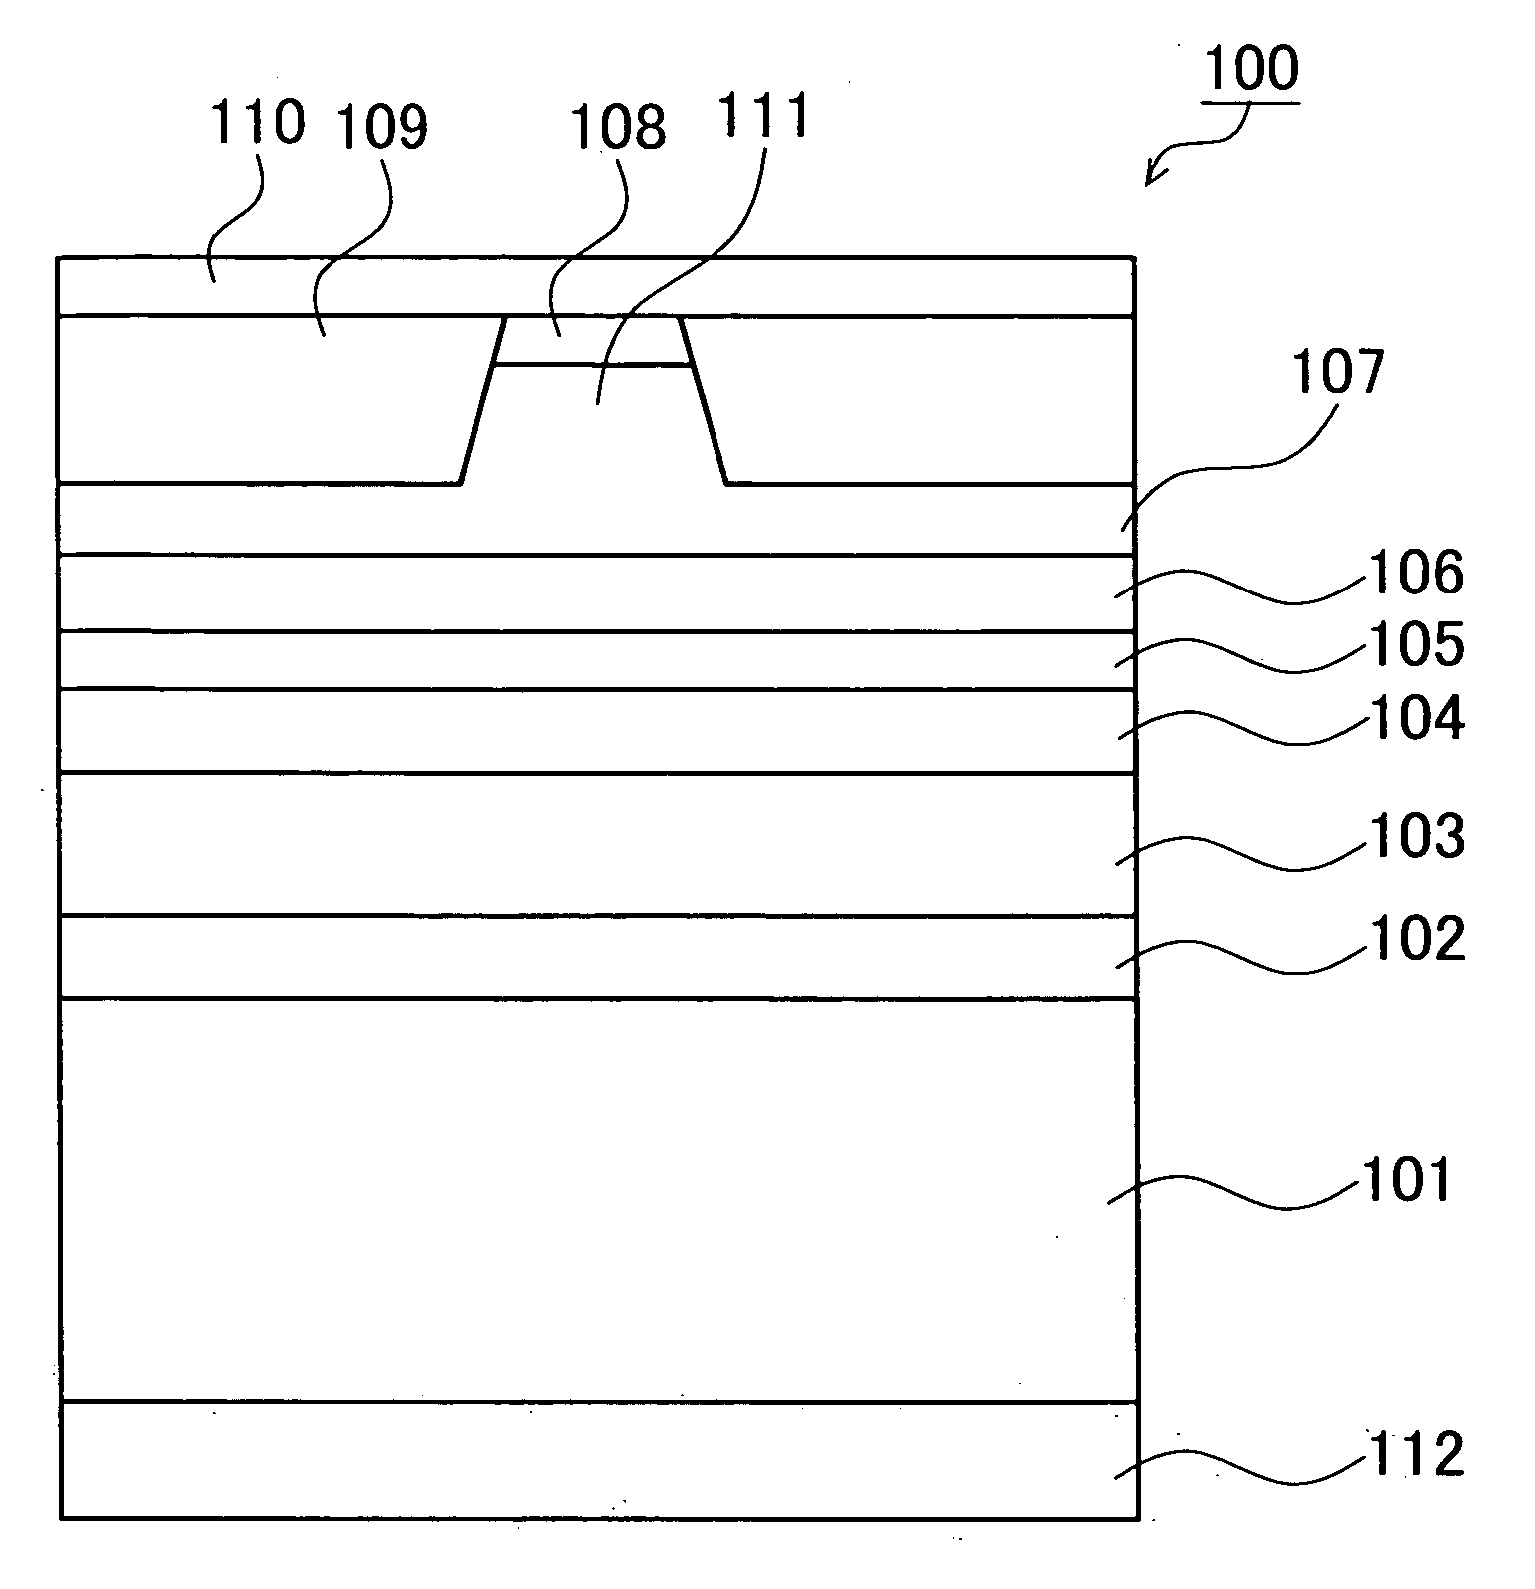 Nitride semiconductor light-emitting device and method of manufacture thereof